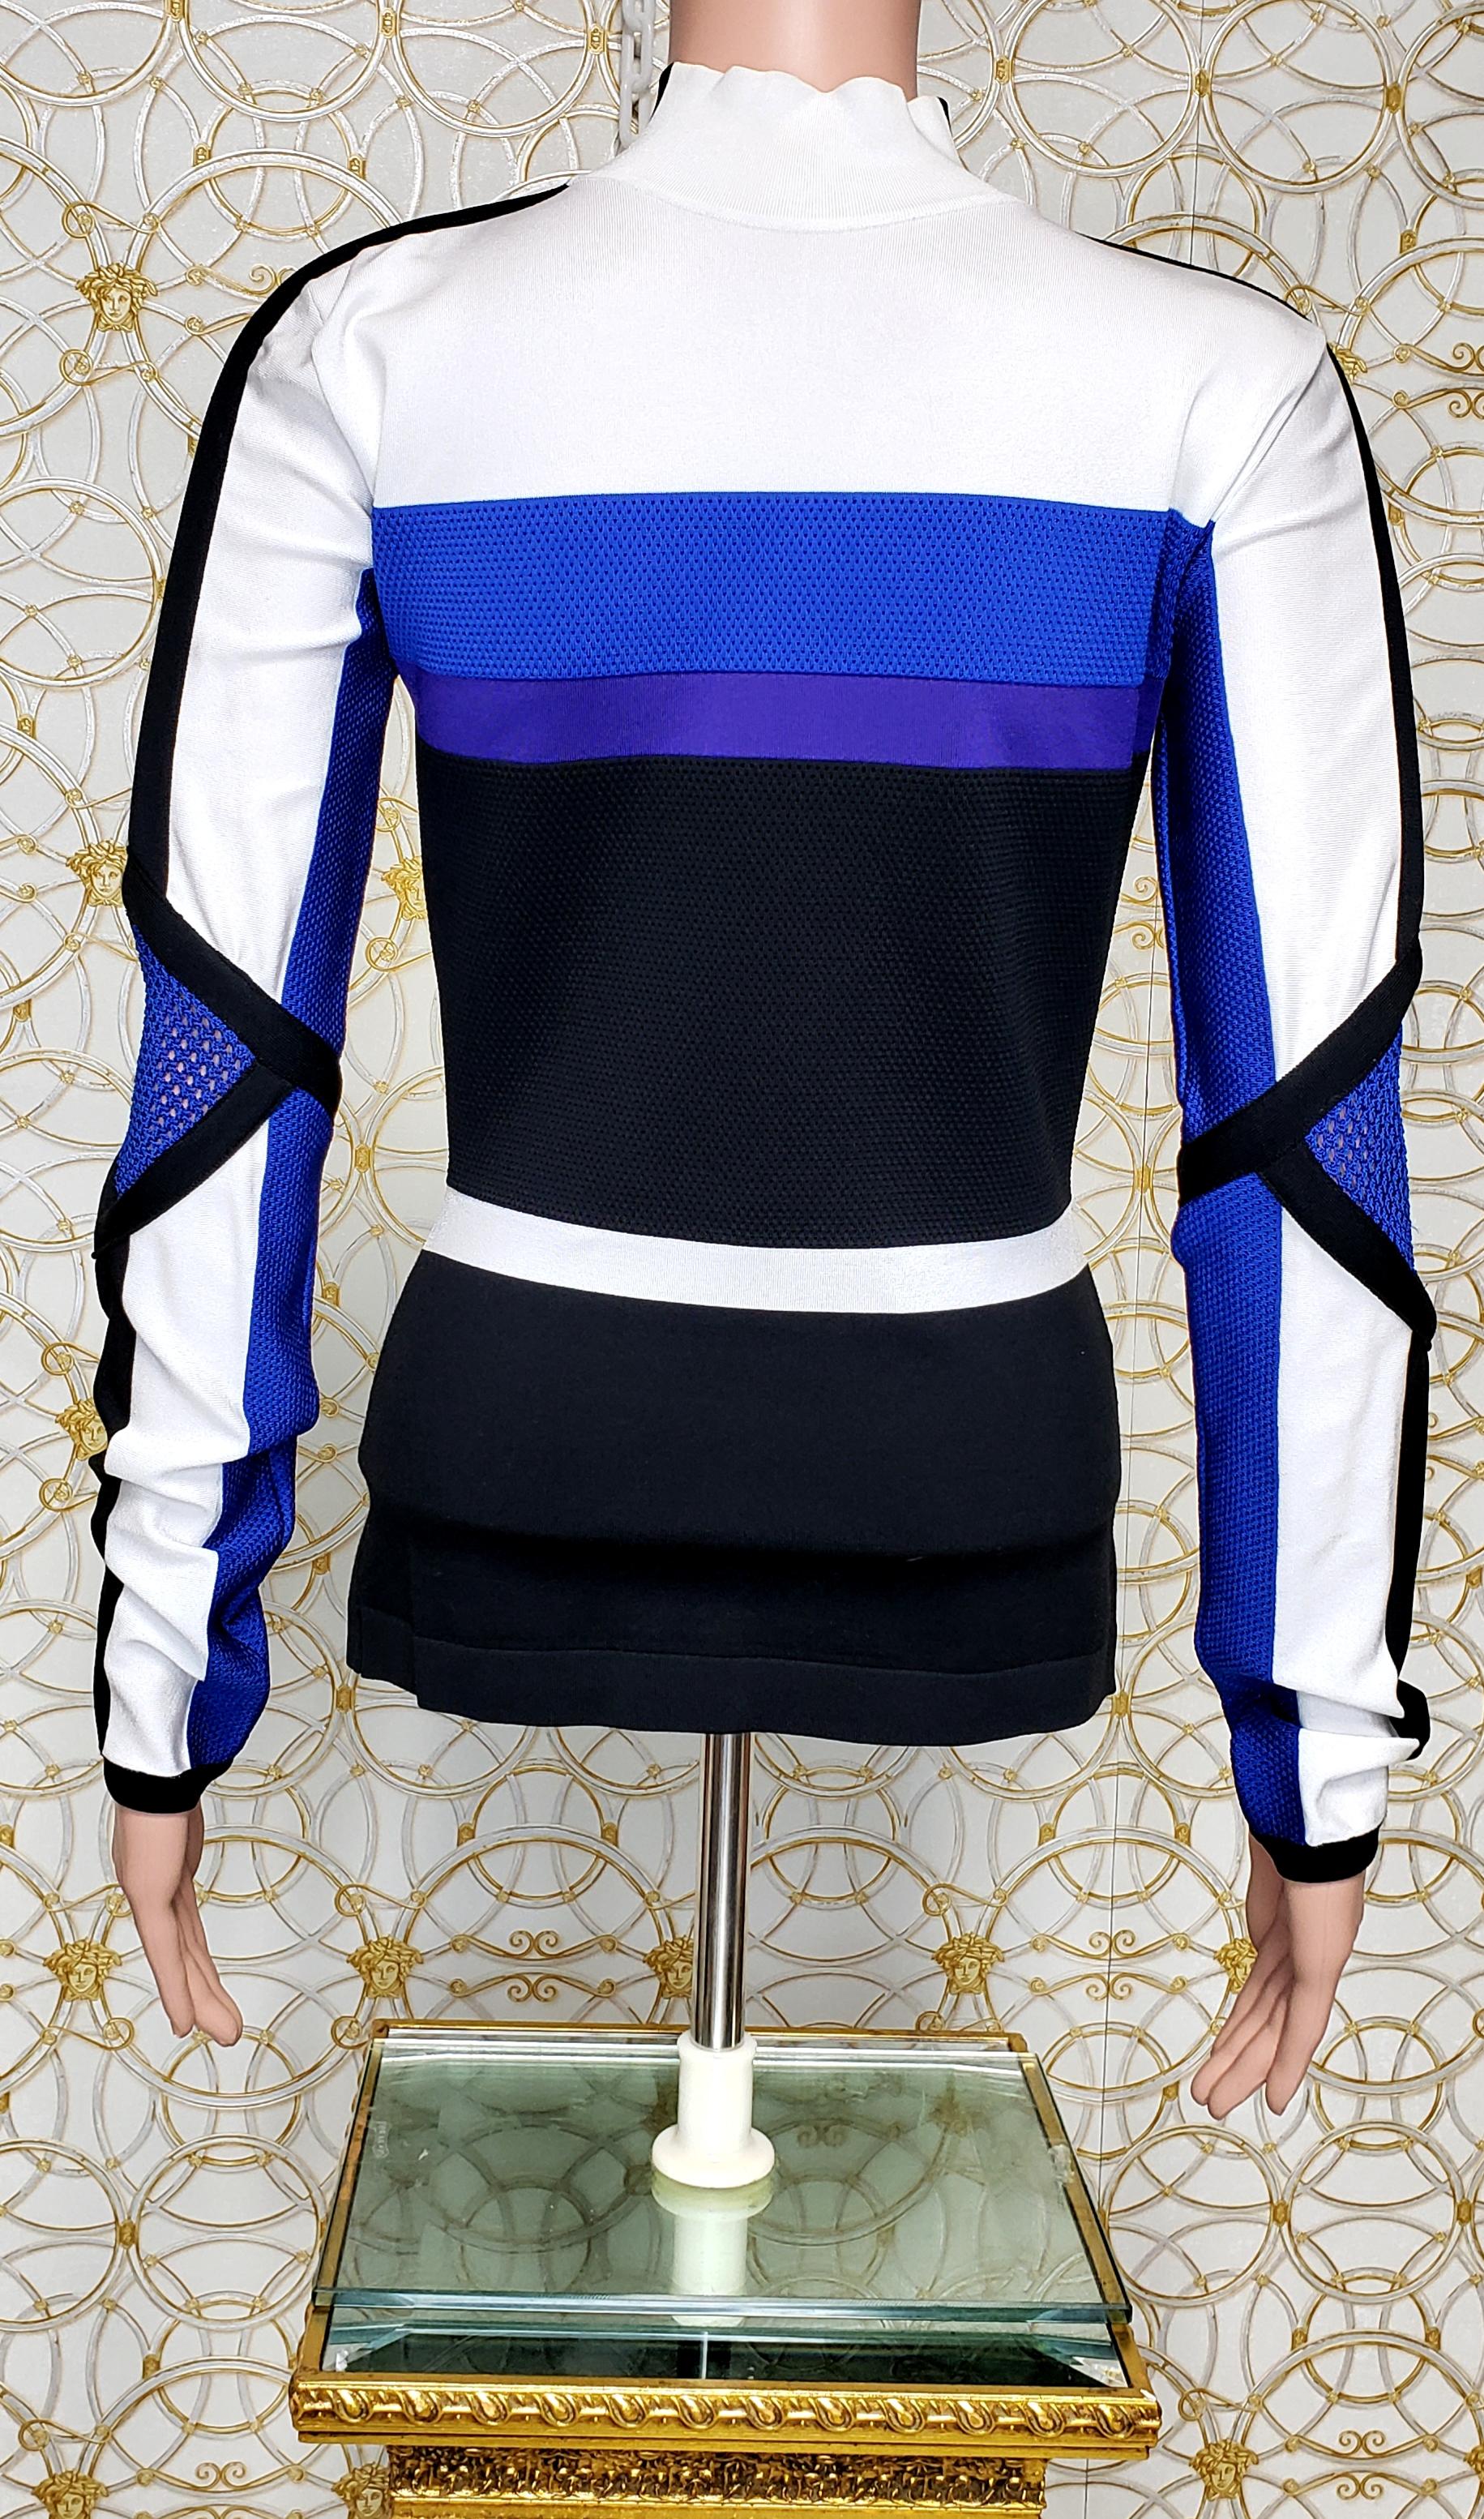 Pre-Fall 2015 look # 12 VERSACE STRETCHY TURTLENECK TOP 42 - 6 For Sale 1